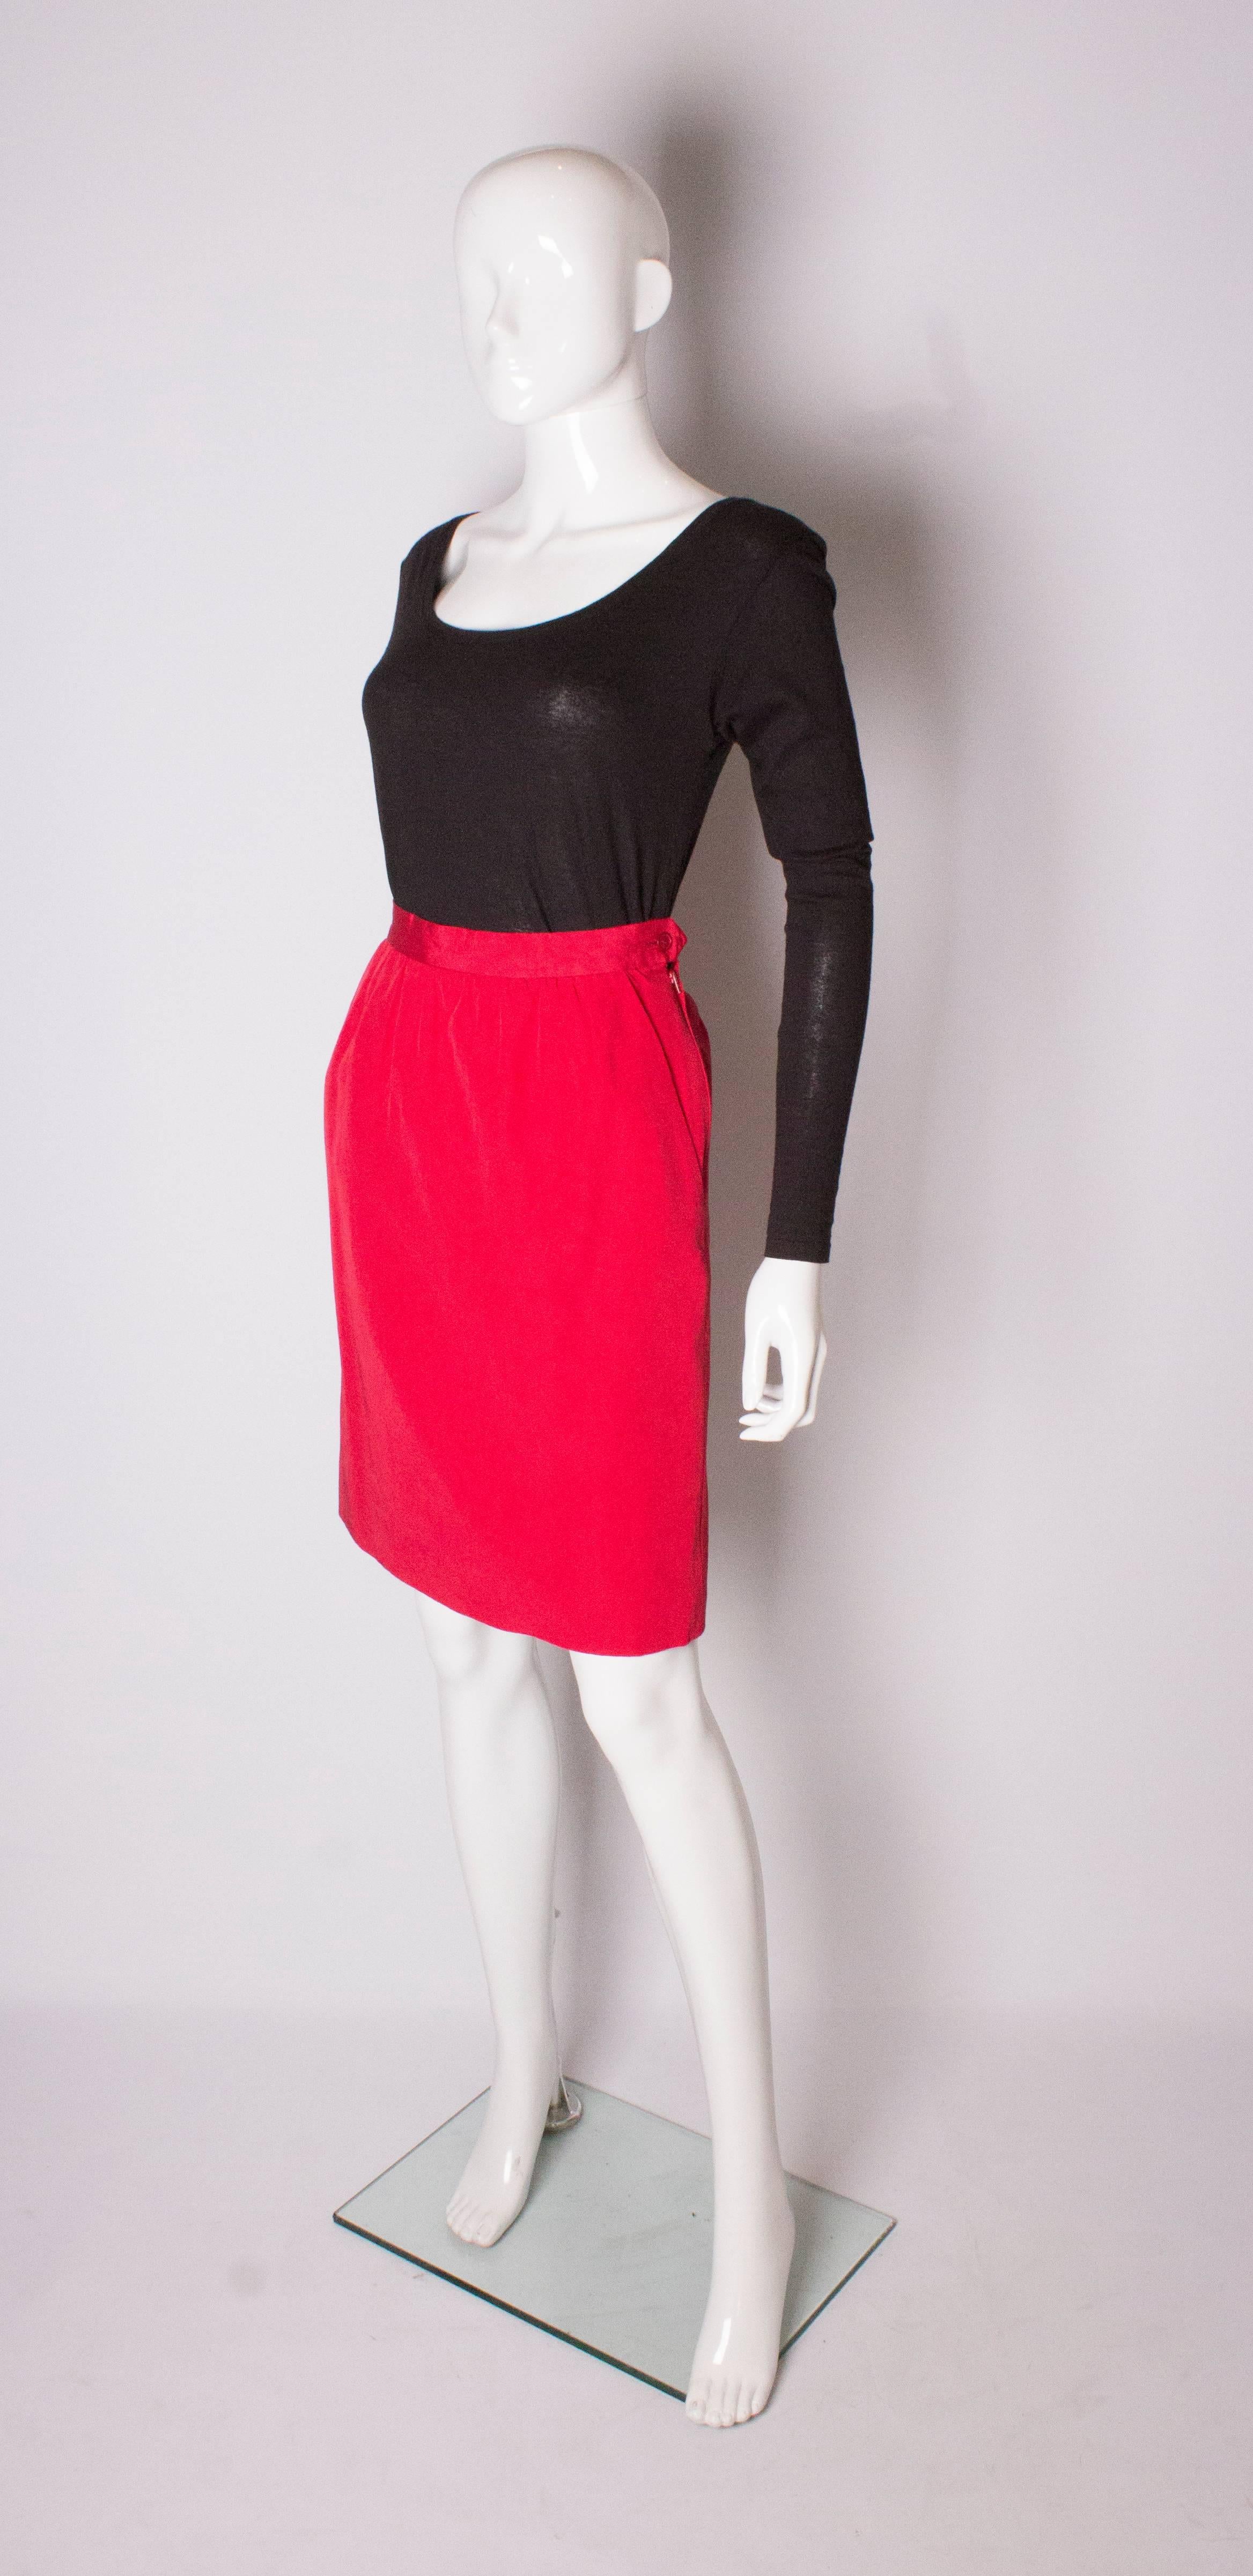 A chic skirt by Yves Saint Laurent, Rive Gauche line. The skirt is a cotton and viscose mix ( 53% cotton, 47% viscose). It has sloping pockets on each side , gathering at the waist and a zip on the left hand side.